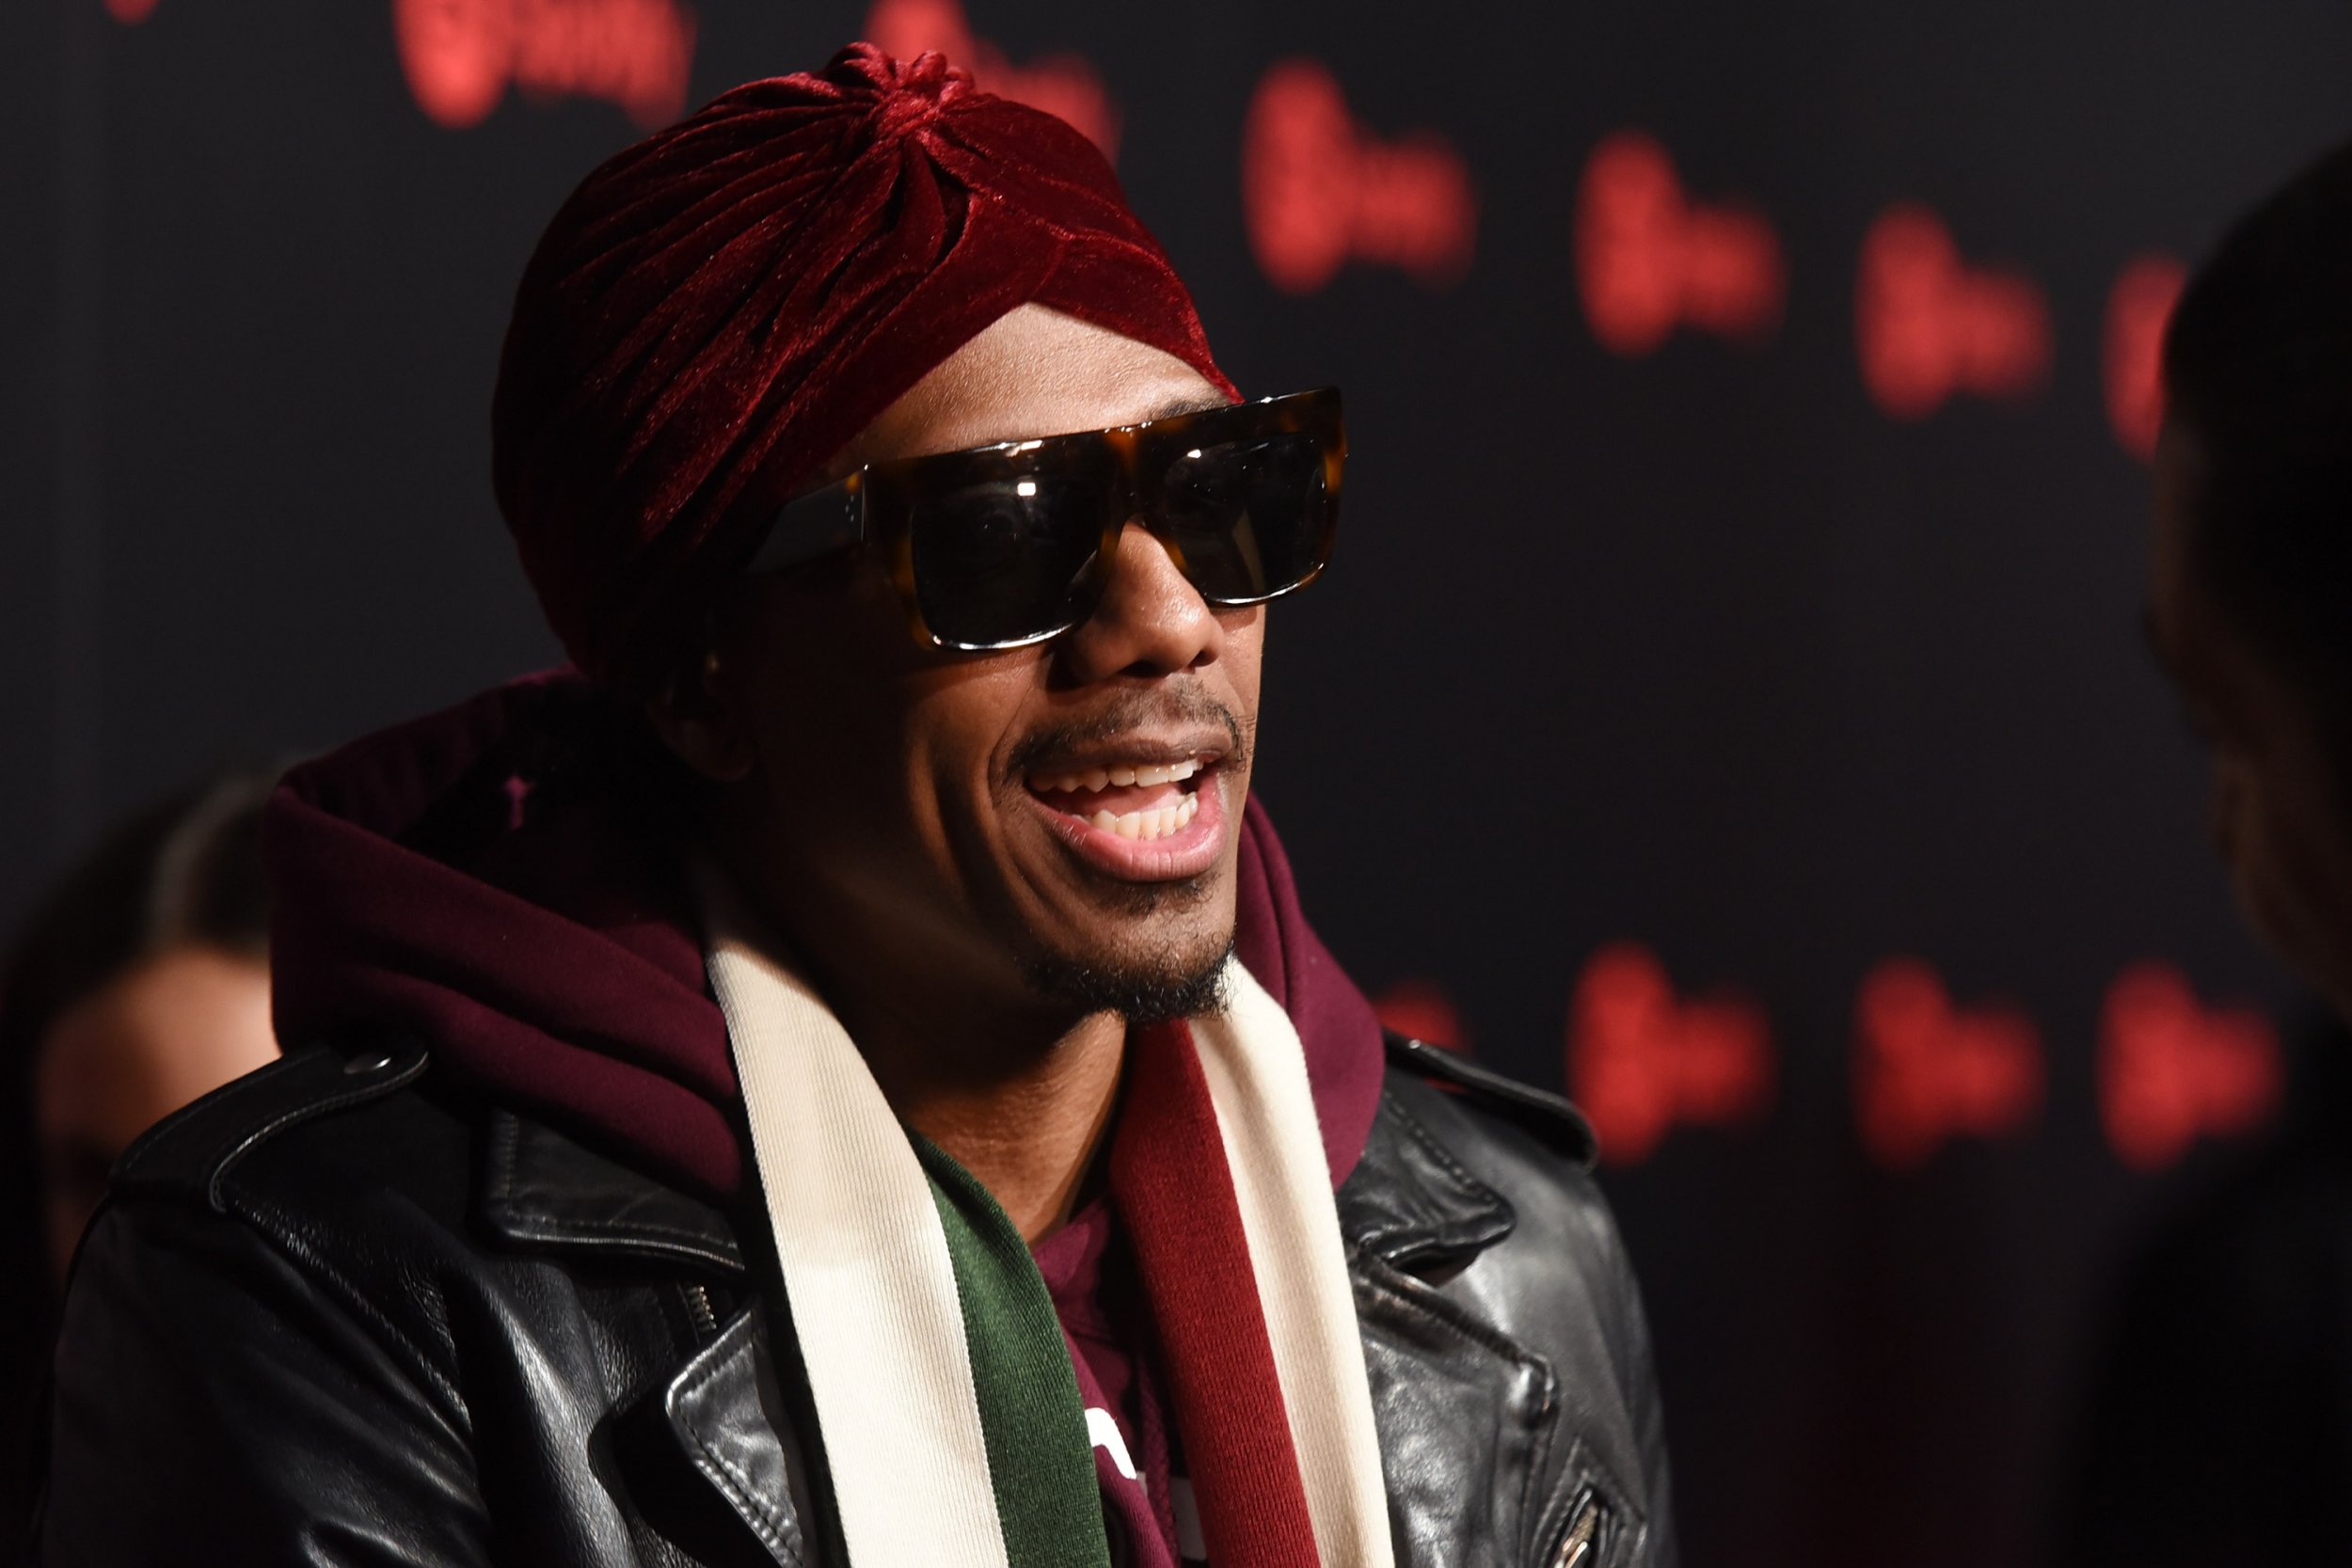 Host Nick Cannon